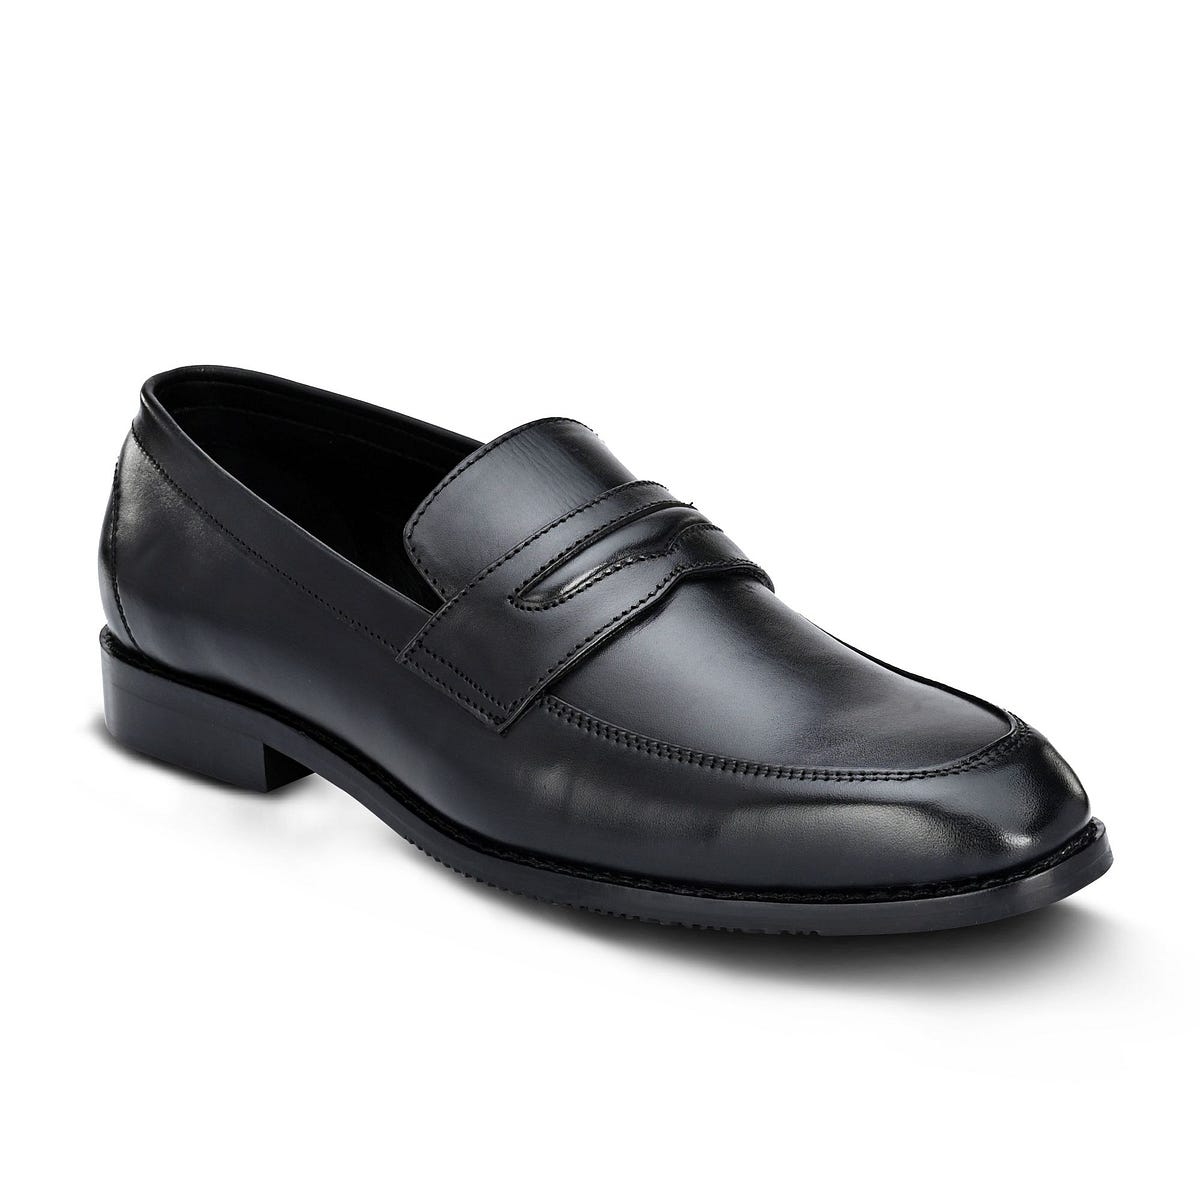 Black Formal Leather Shoes For Men - Tuoiocchi Shoes - Medium